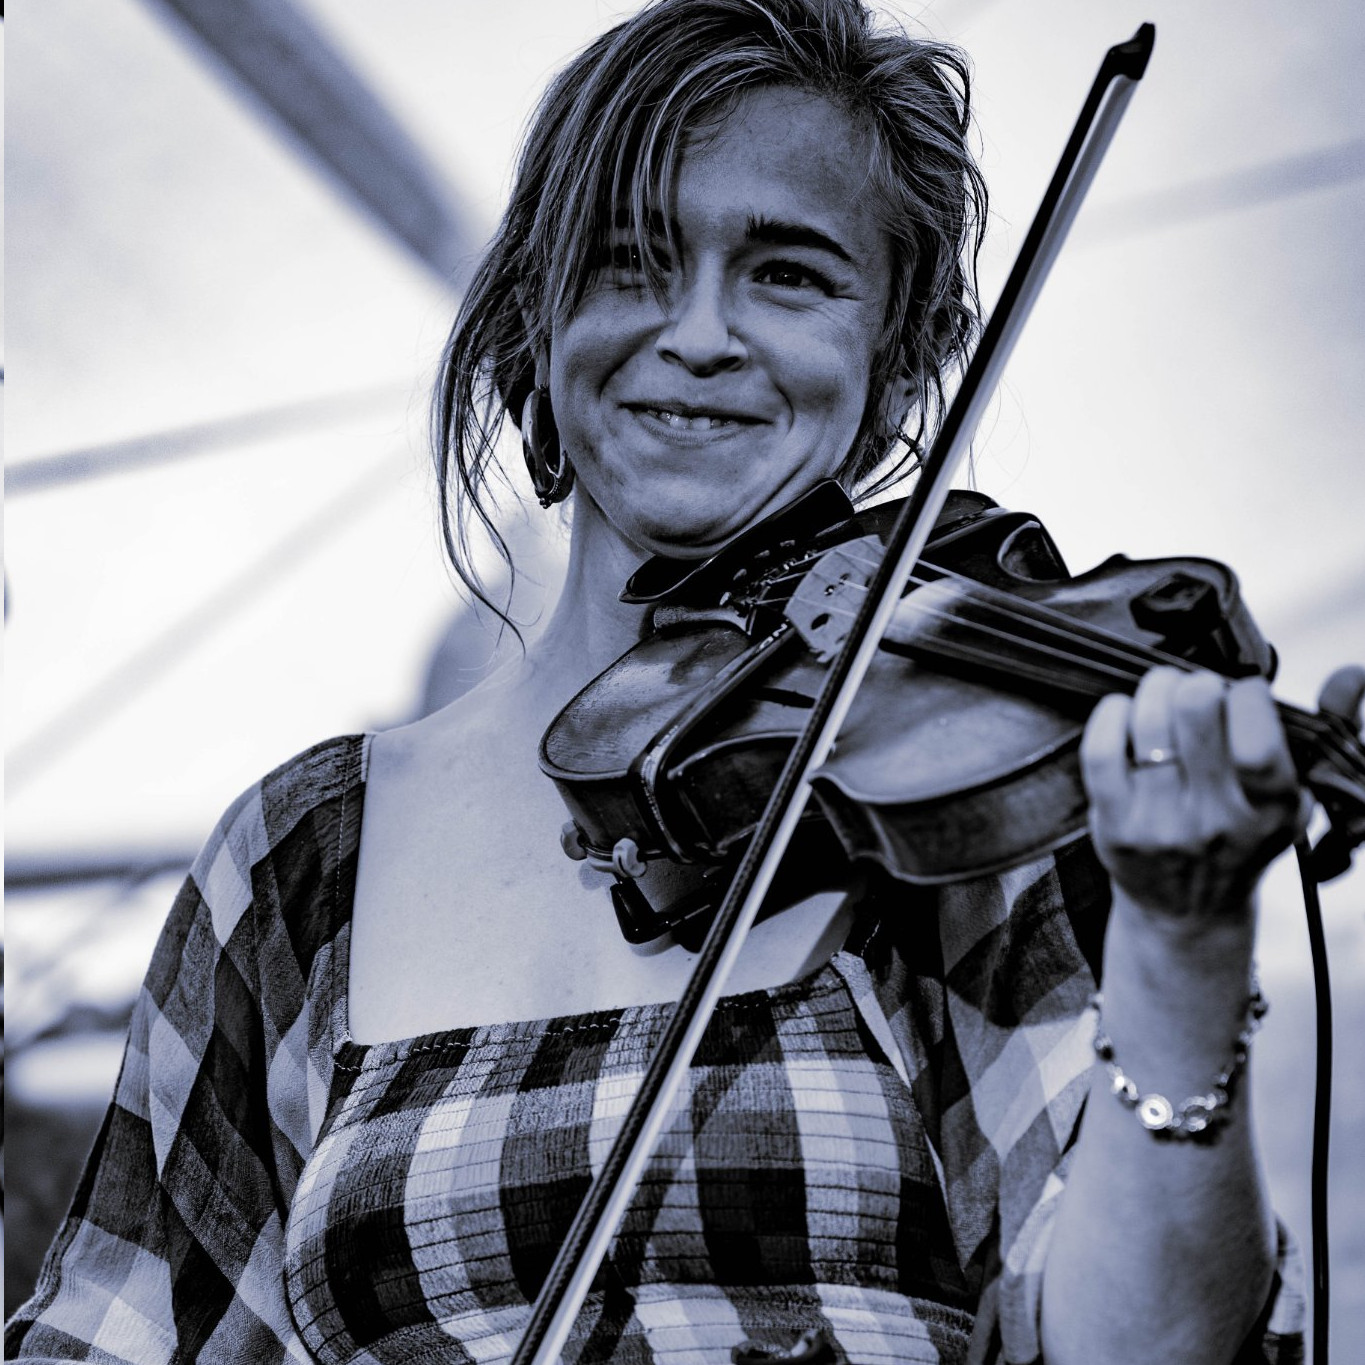 Camilla Rose, Fiddle player with The Freedom Fields Ceilidh Band